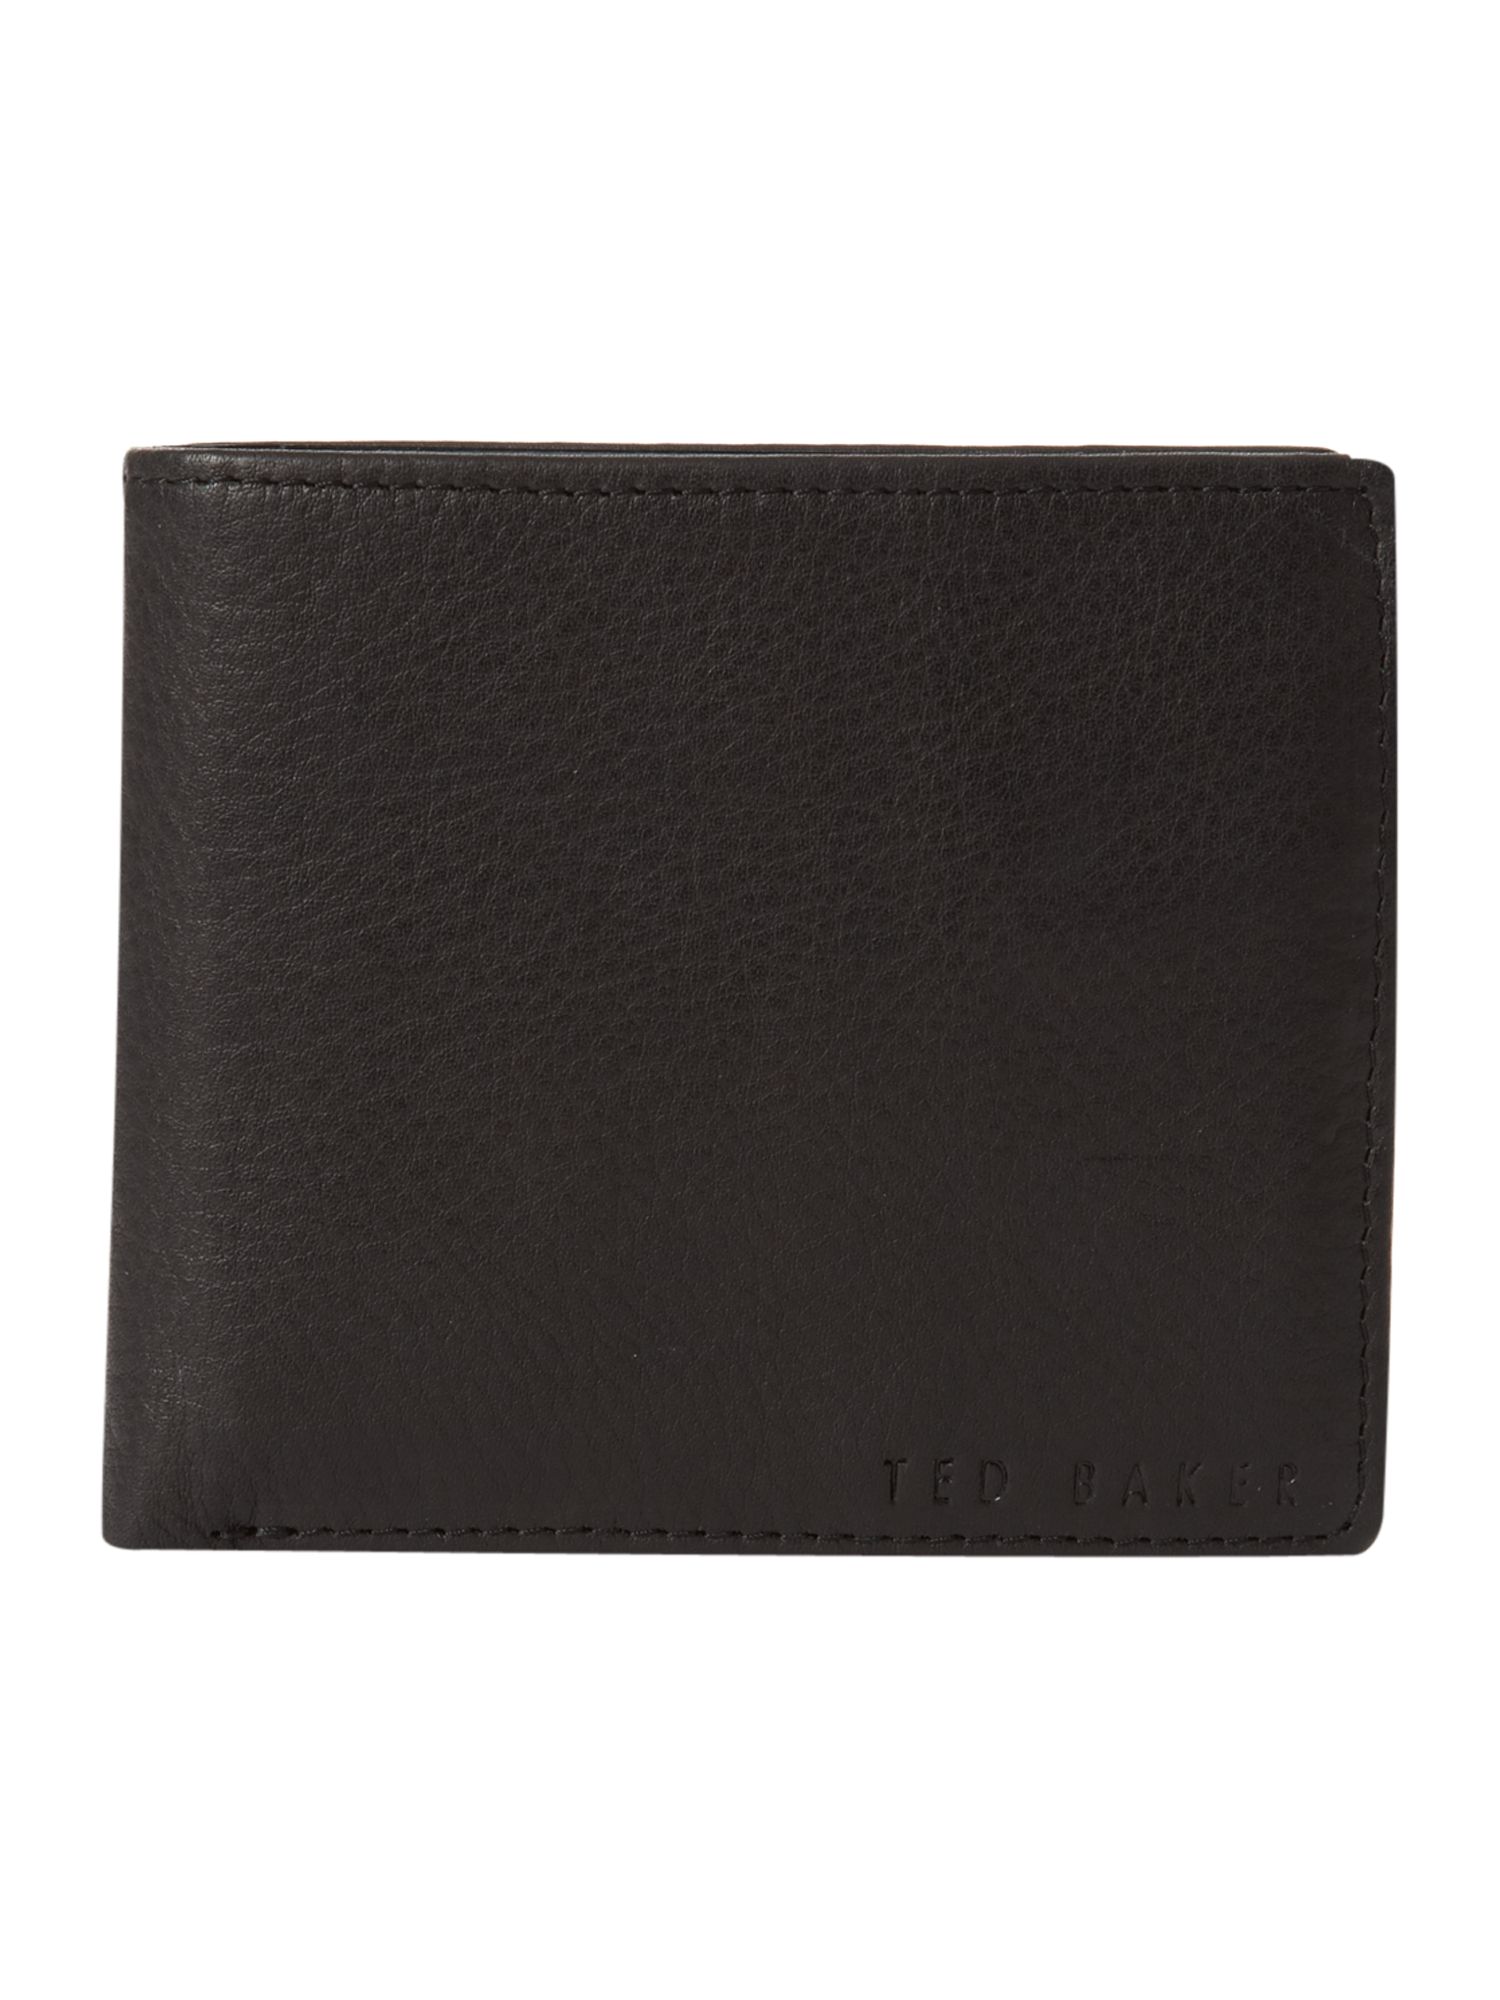 Ted baker Logo Stud Wallet with Coin Pocket in Brown for Men | Lyst